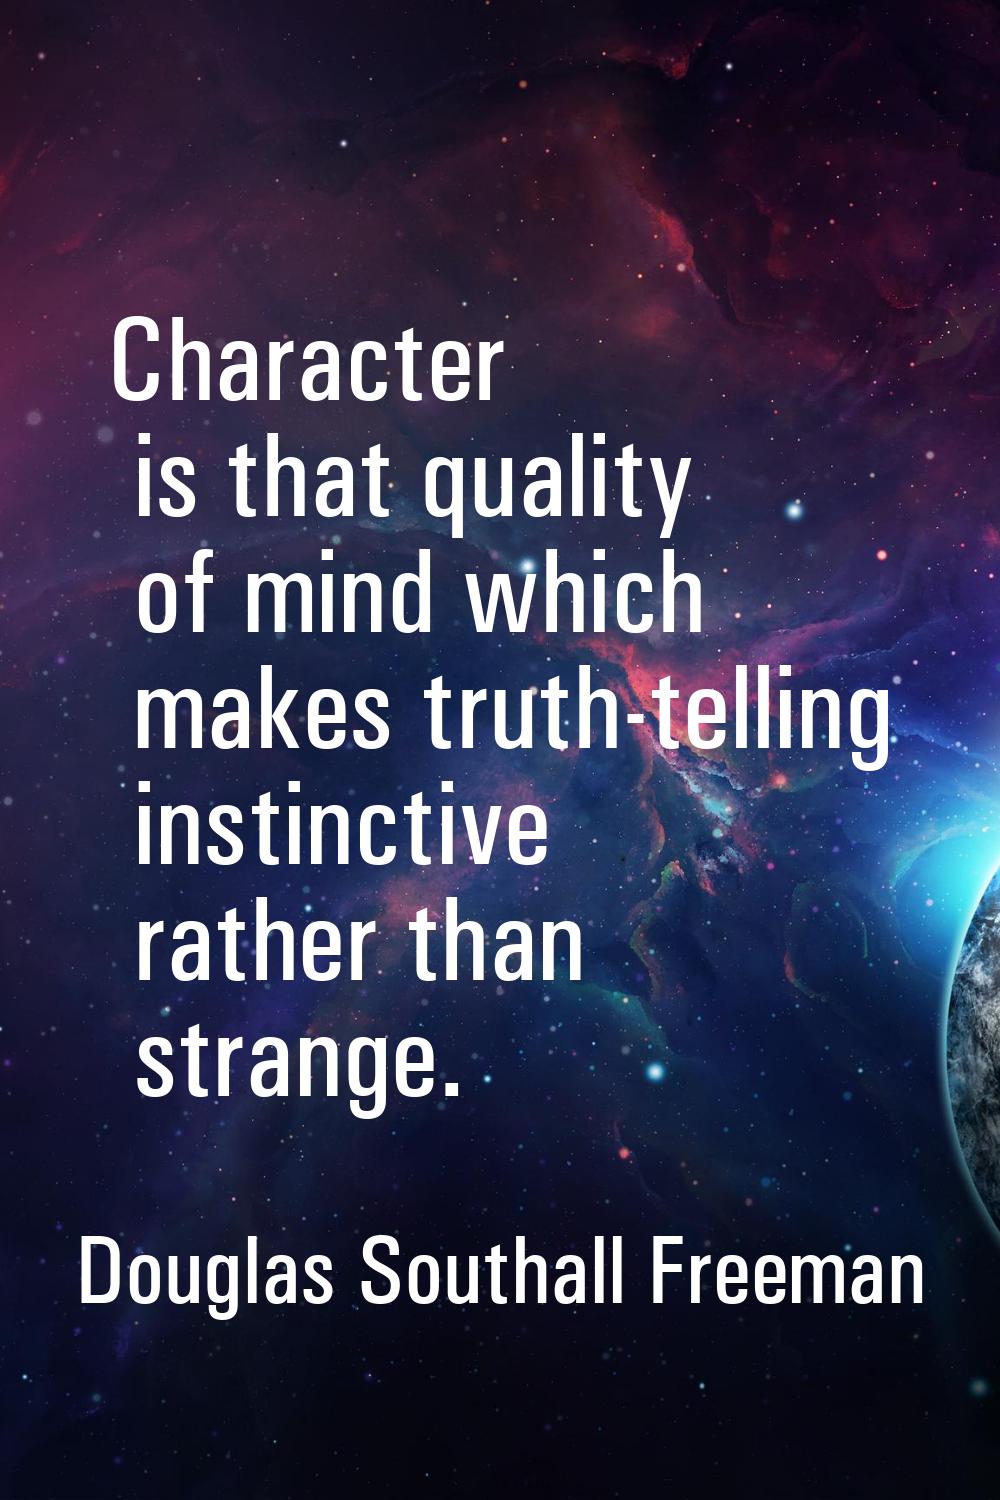 Character is that quality of mind which makes truth-telling instinctive rather than strange.